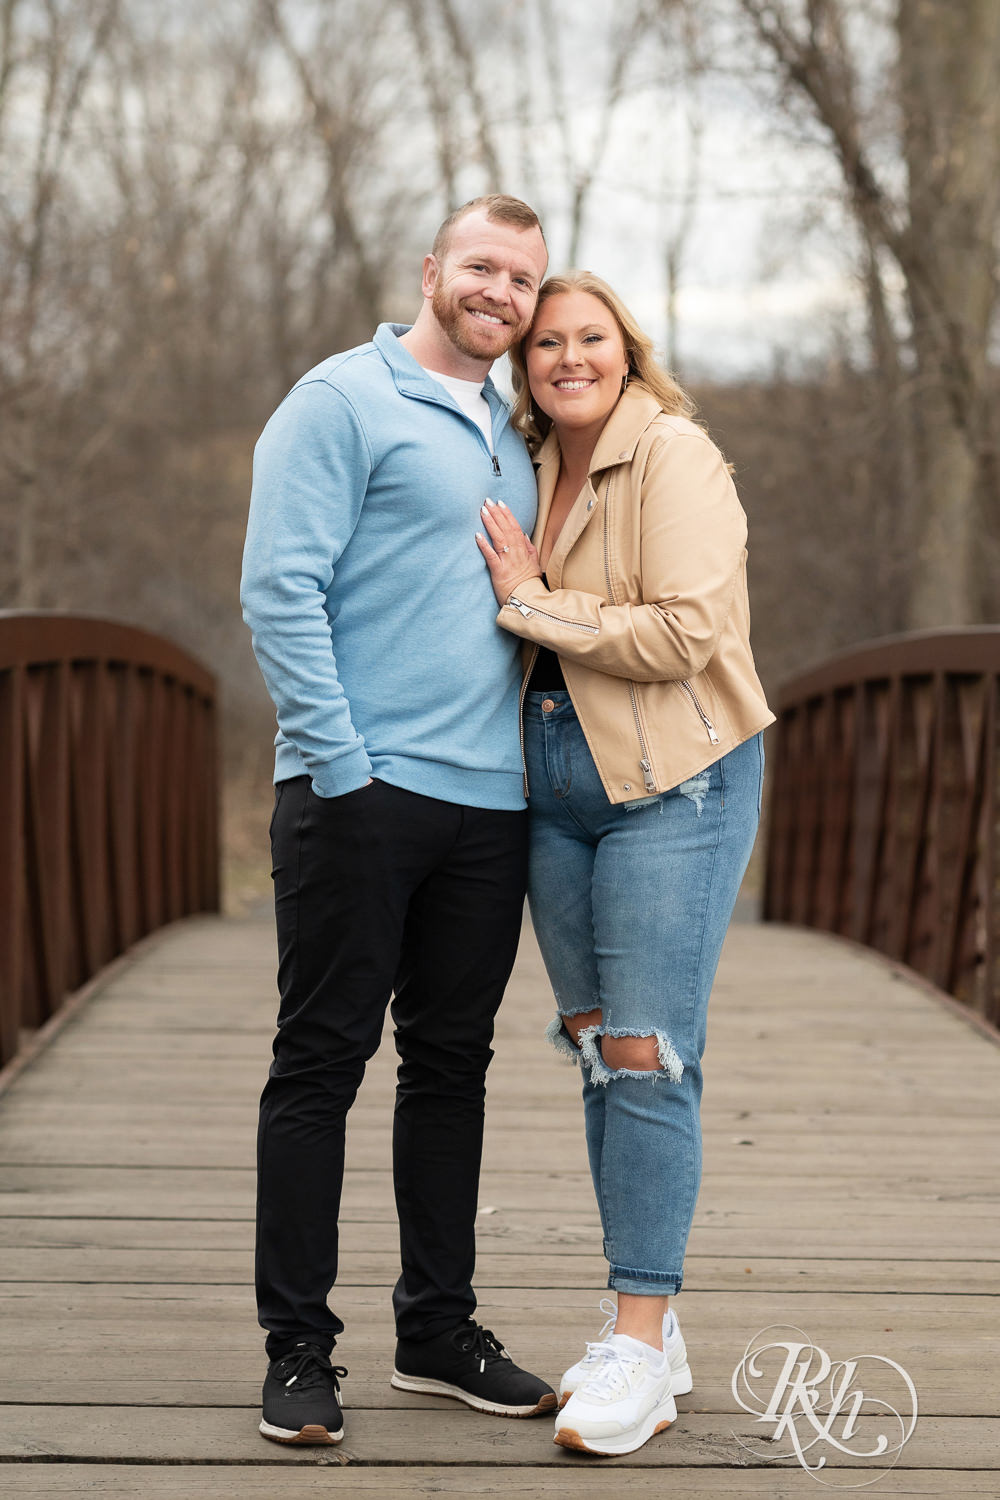 Man in blue shirt and woman in jeans smile on bridge during engagement photography at Rice Creek North Regional Trail in Shoreview, Minnesota.